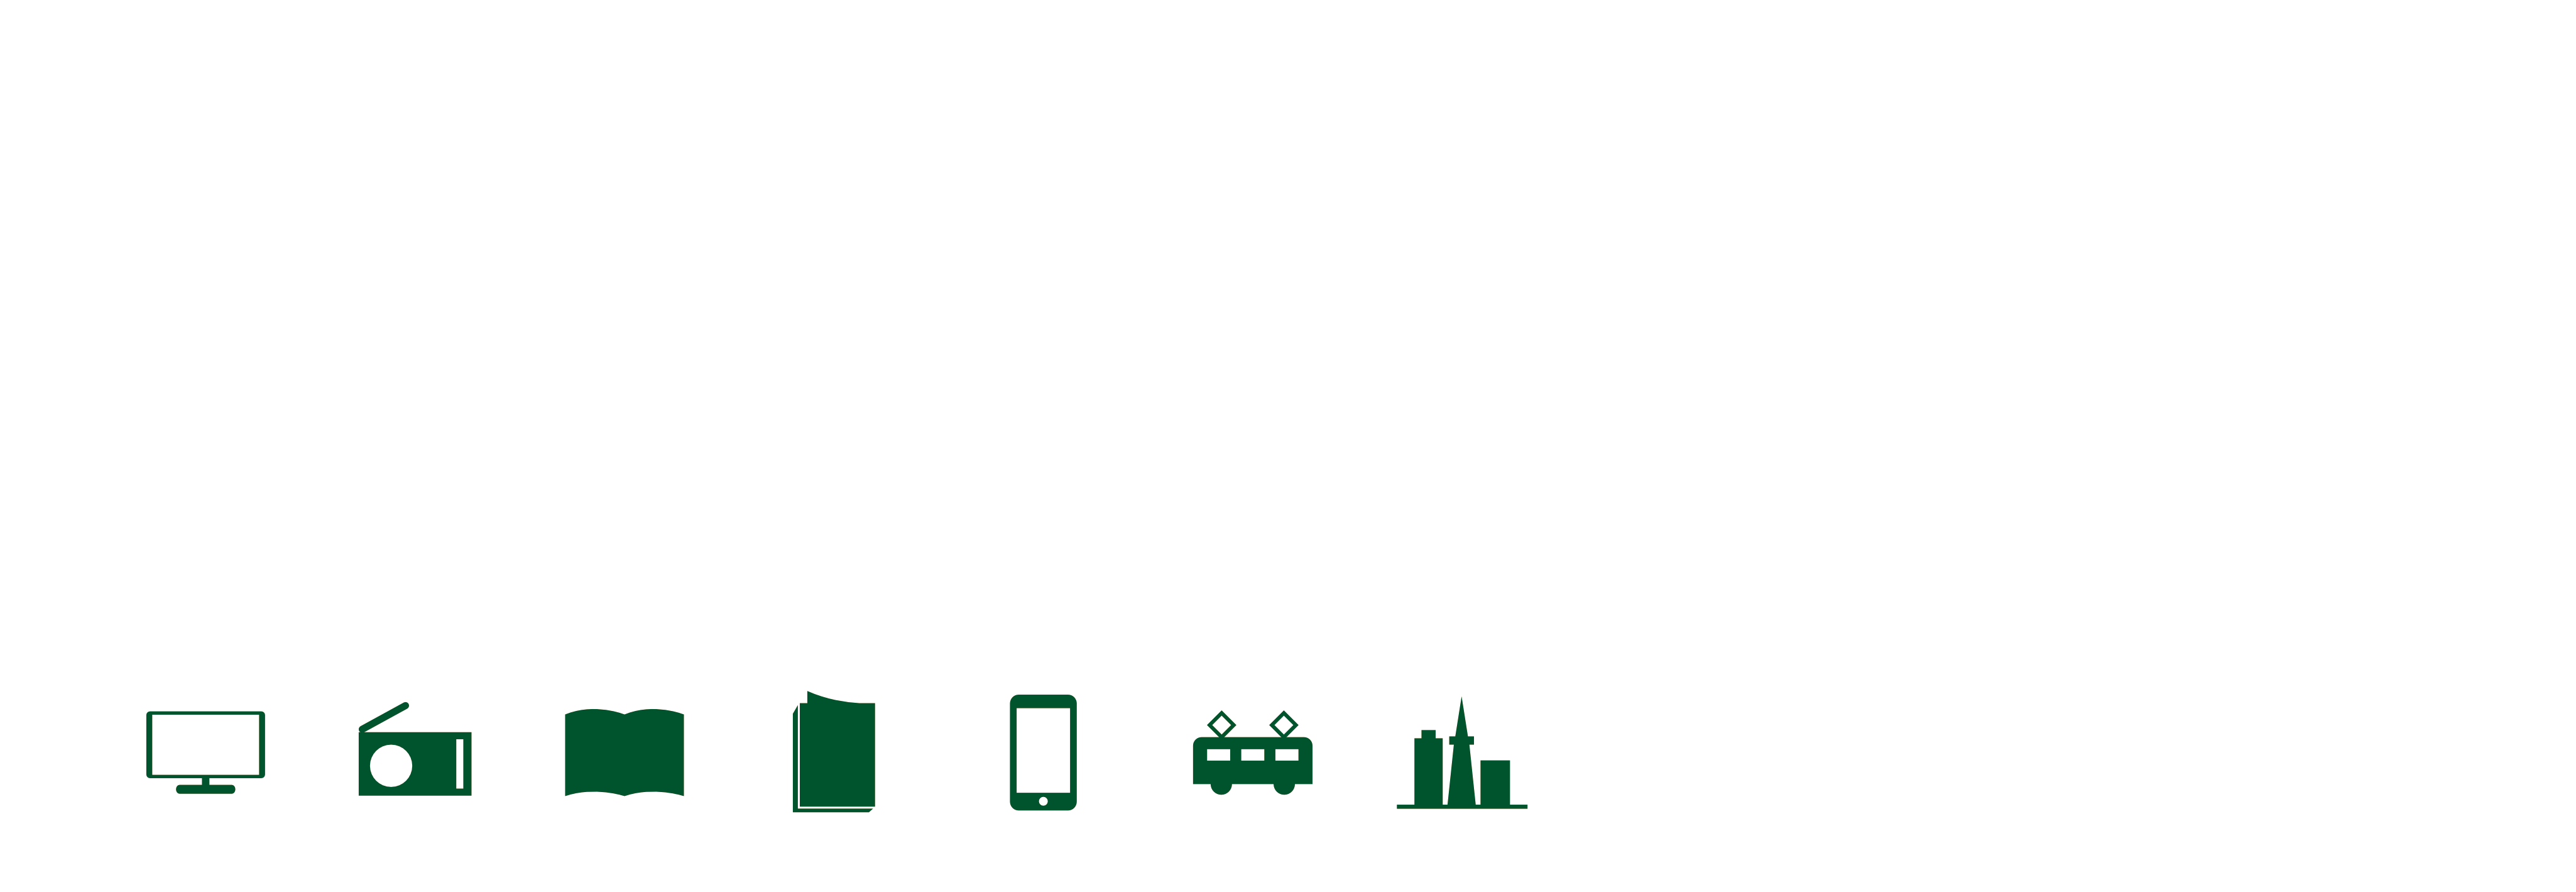 We determine the most approprite media format for the chosen marketing strategy